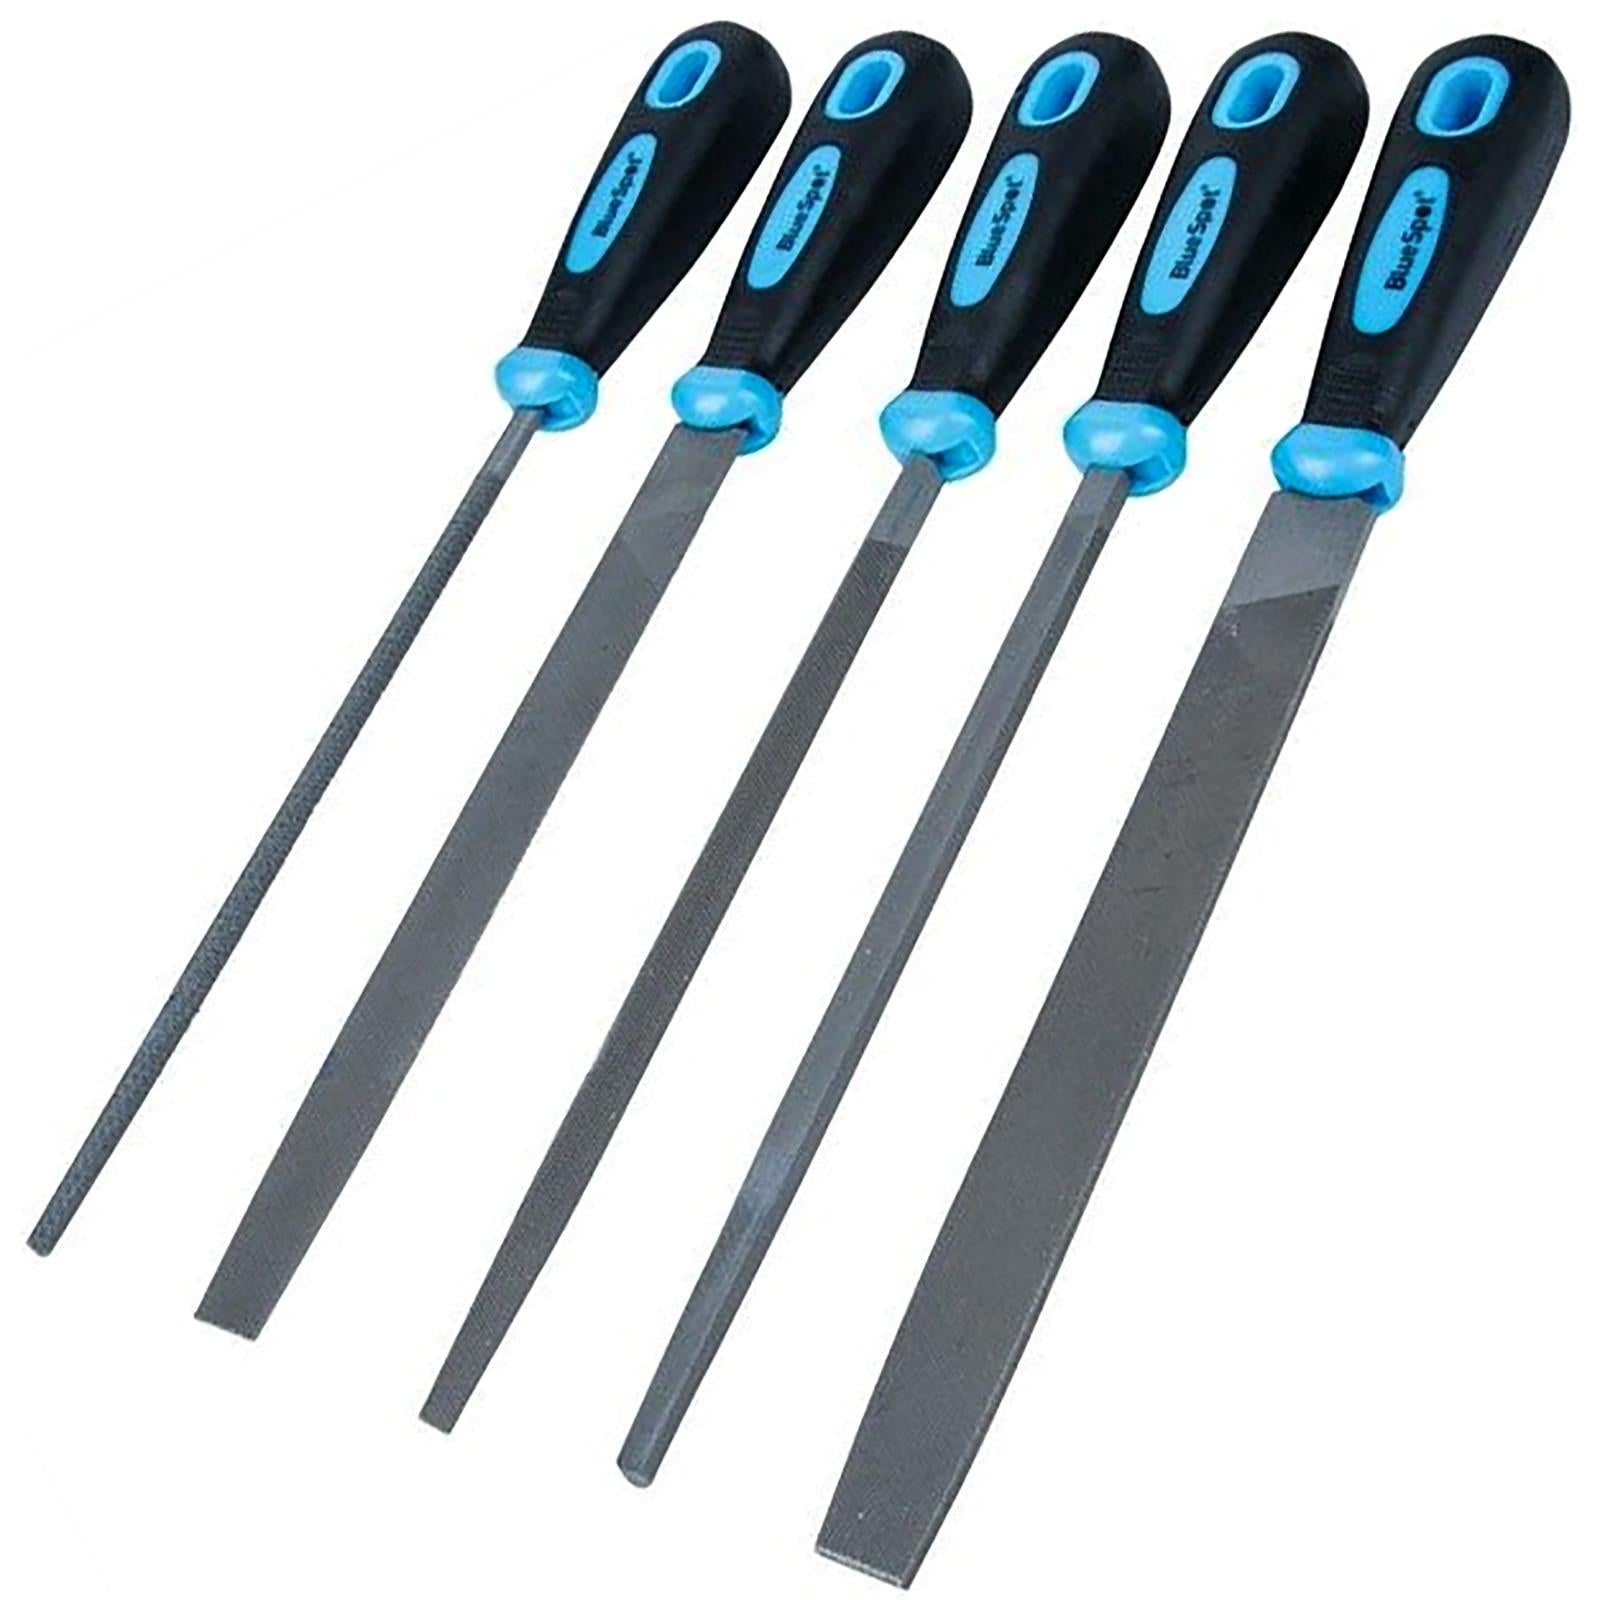 BlueSpot Engineers File Set Half Round Triangle Flat Square Rubber Grips 5pc